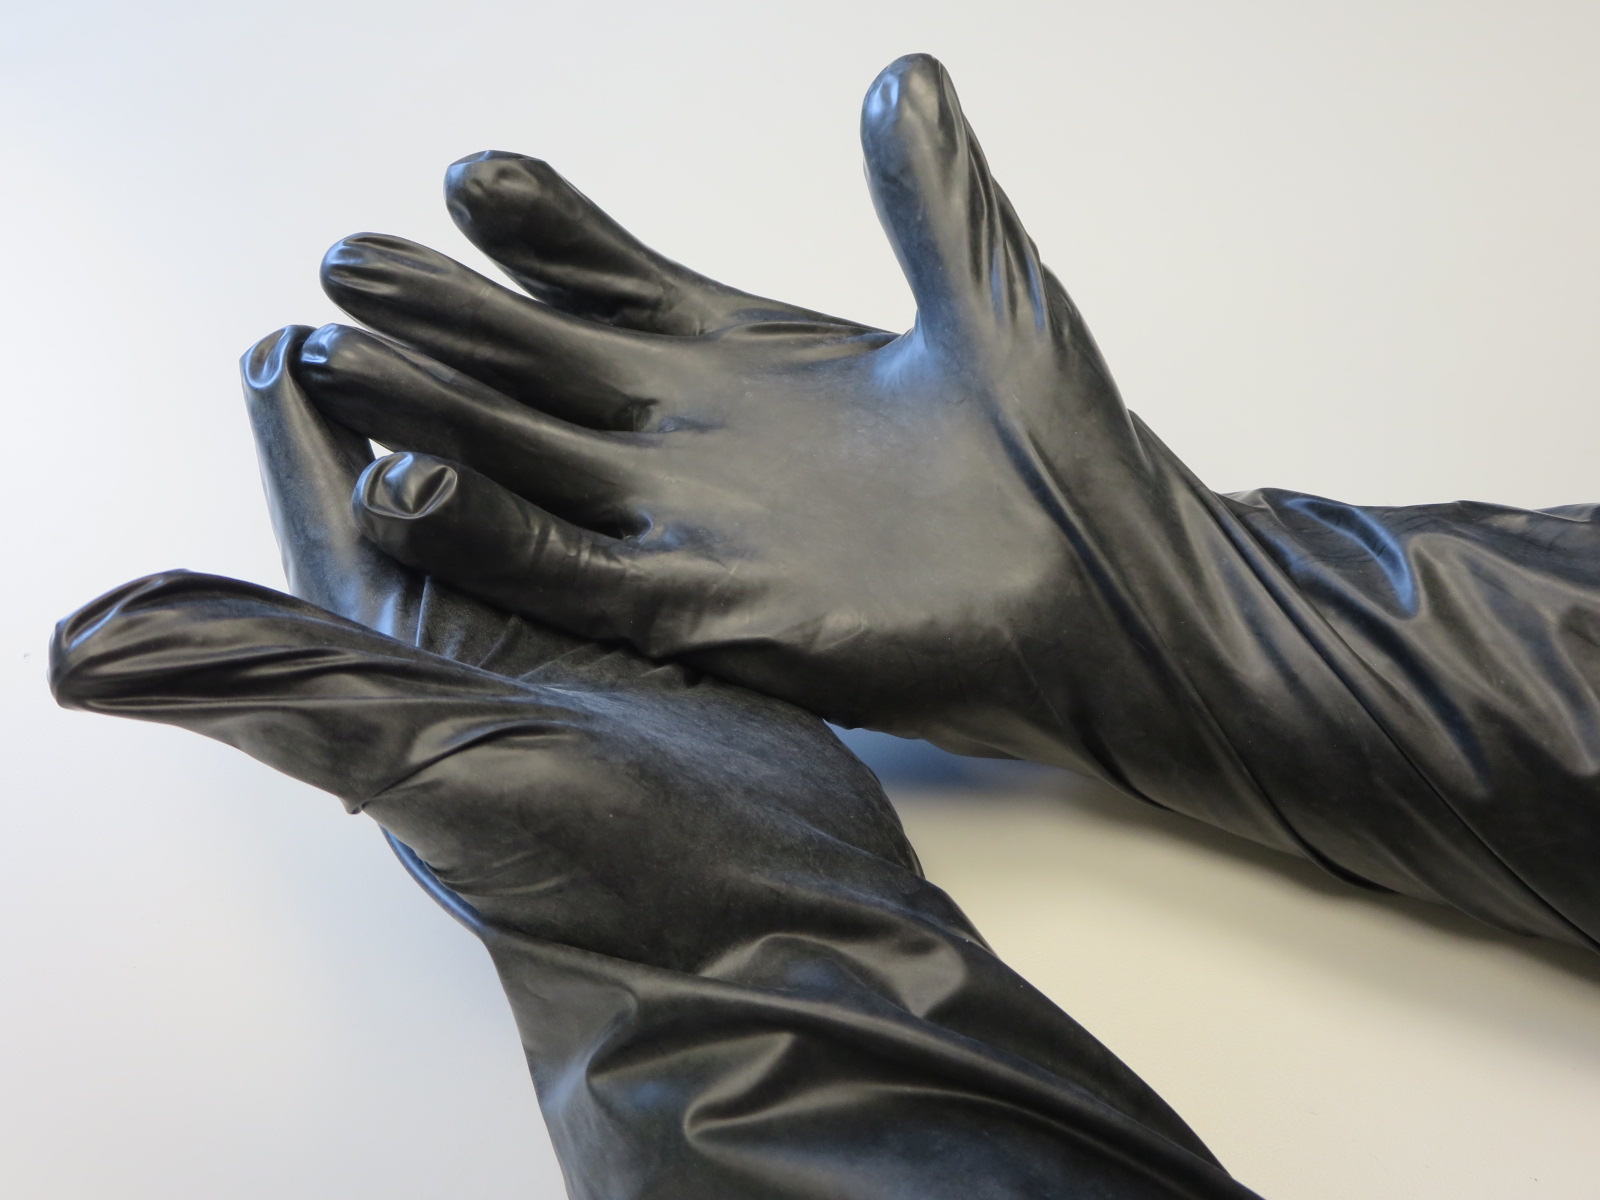 CP14F Guardian® Manufacturing Smooth Fitted Butyl Gloves - 7 mil